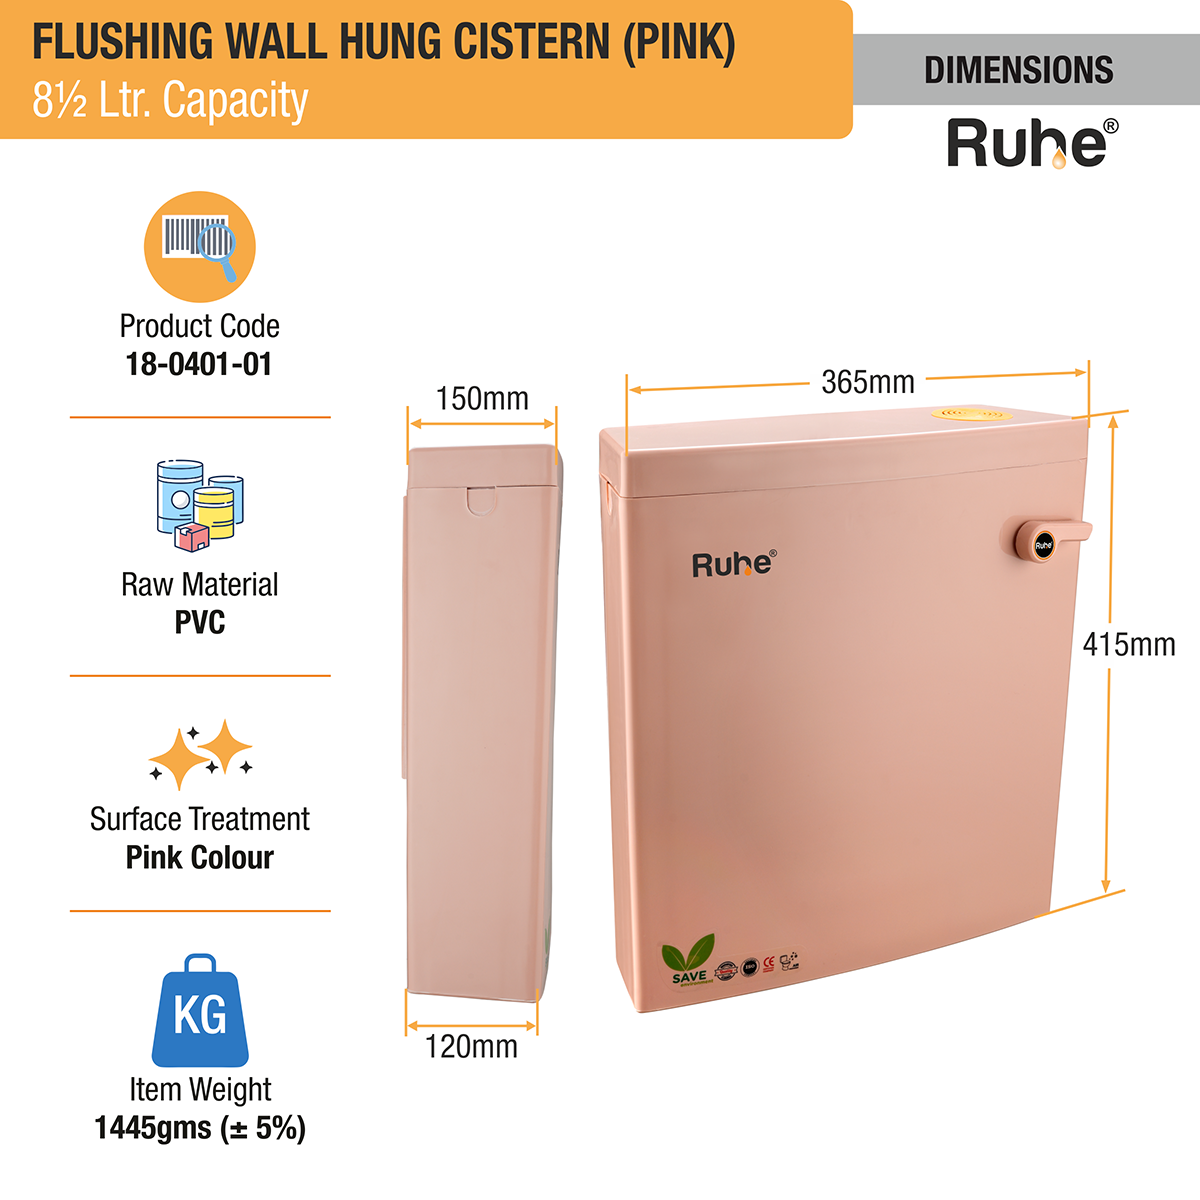 Flushing Wall Hung Cistern 8.5 Ltr. (Pink) dimensions and size